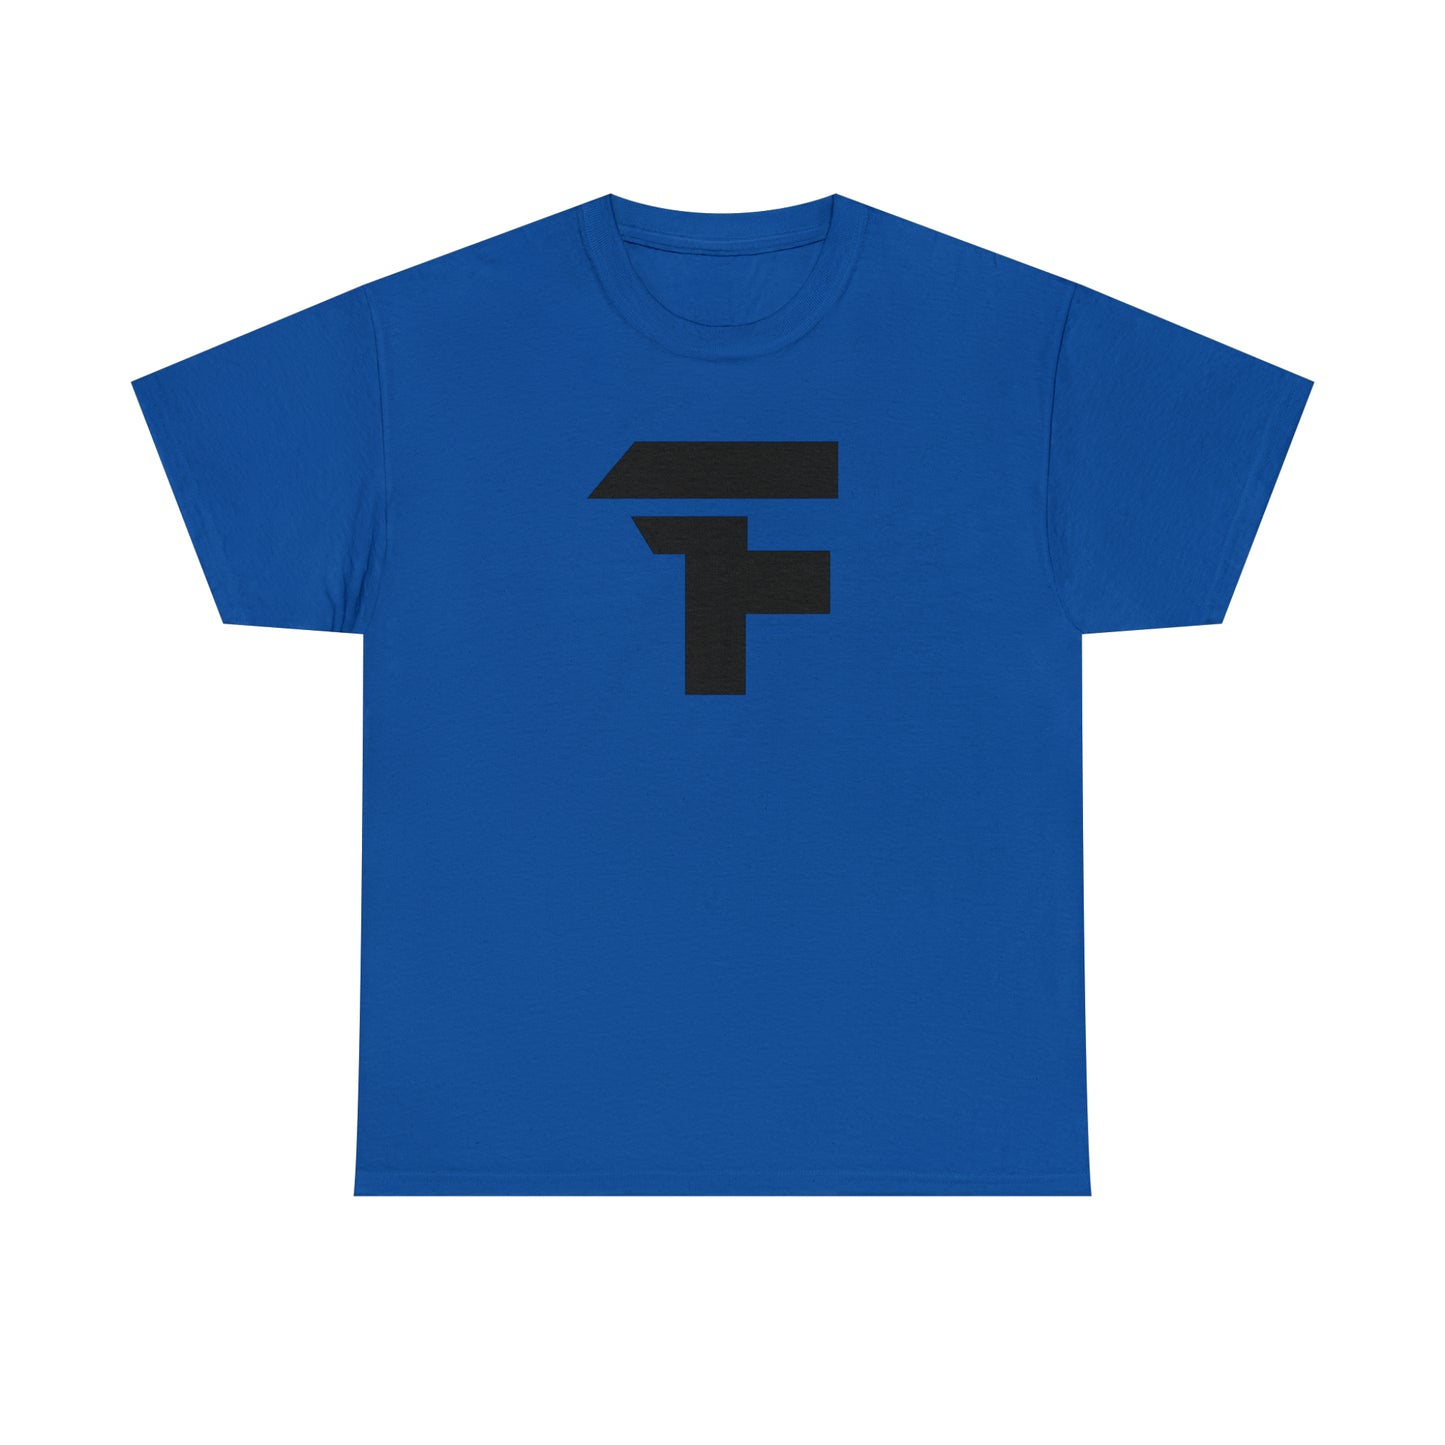 Francis Thorne "FT" Tee